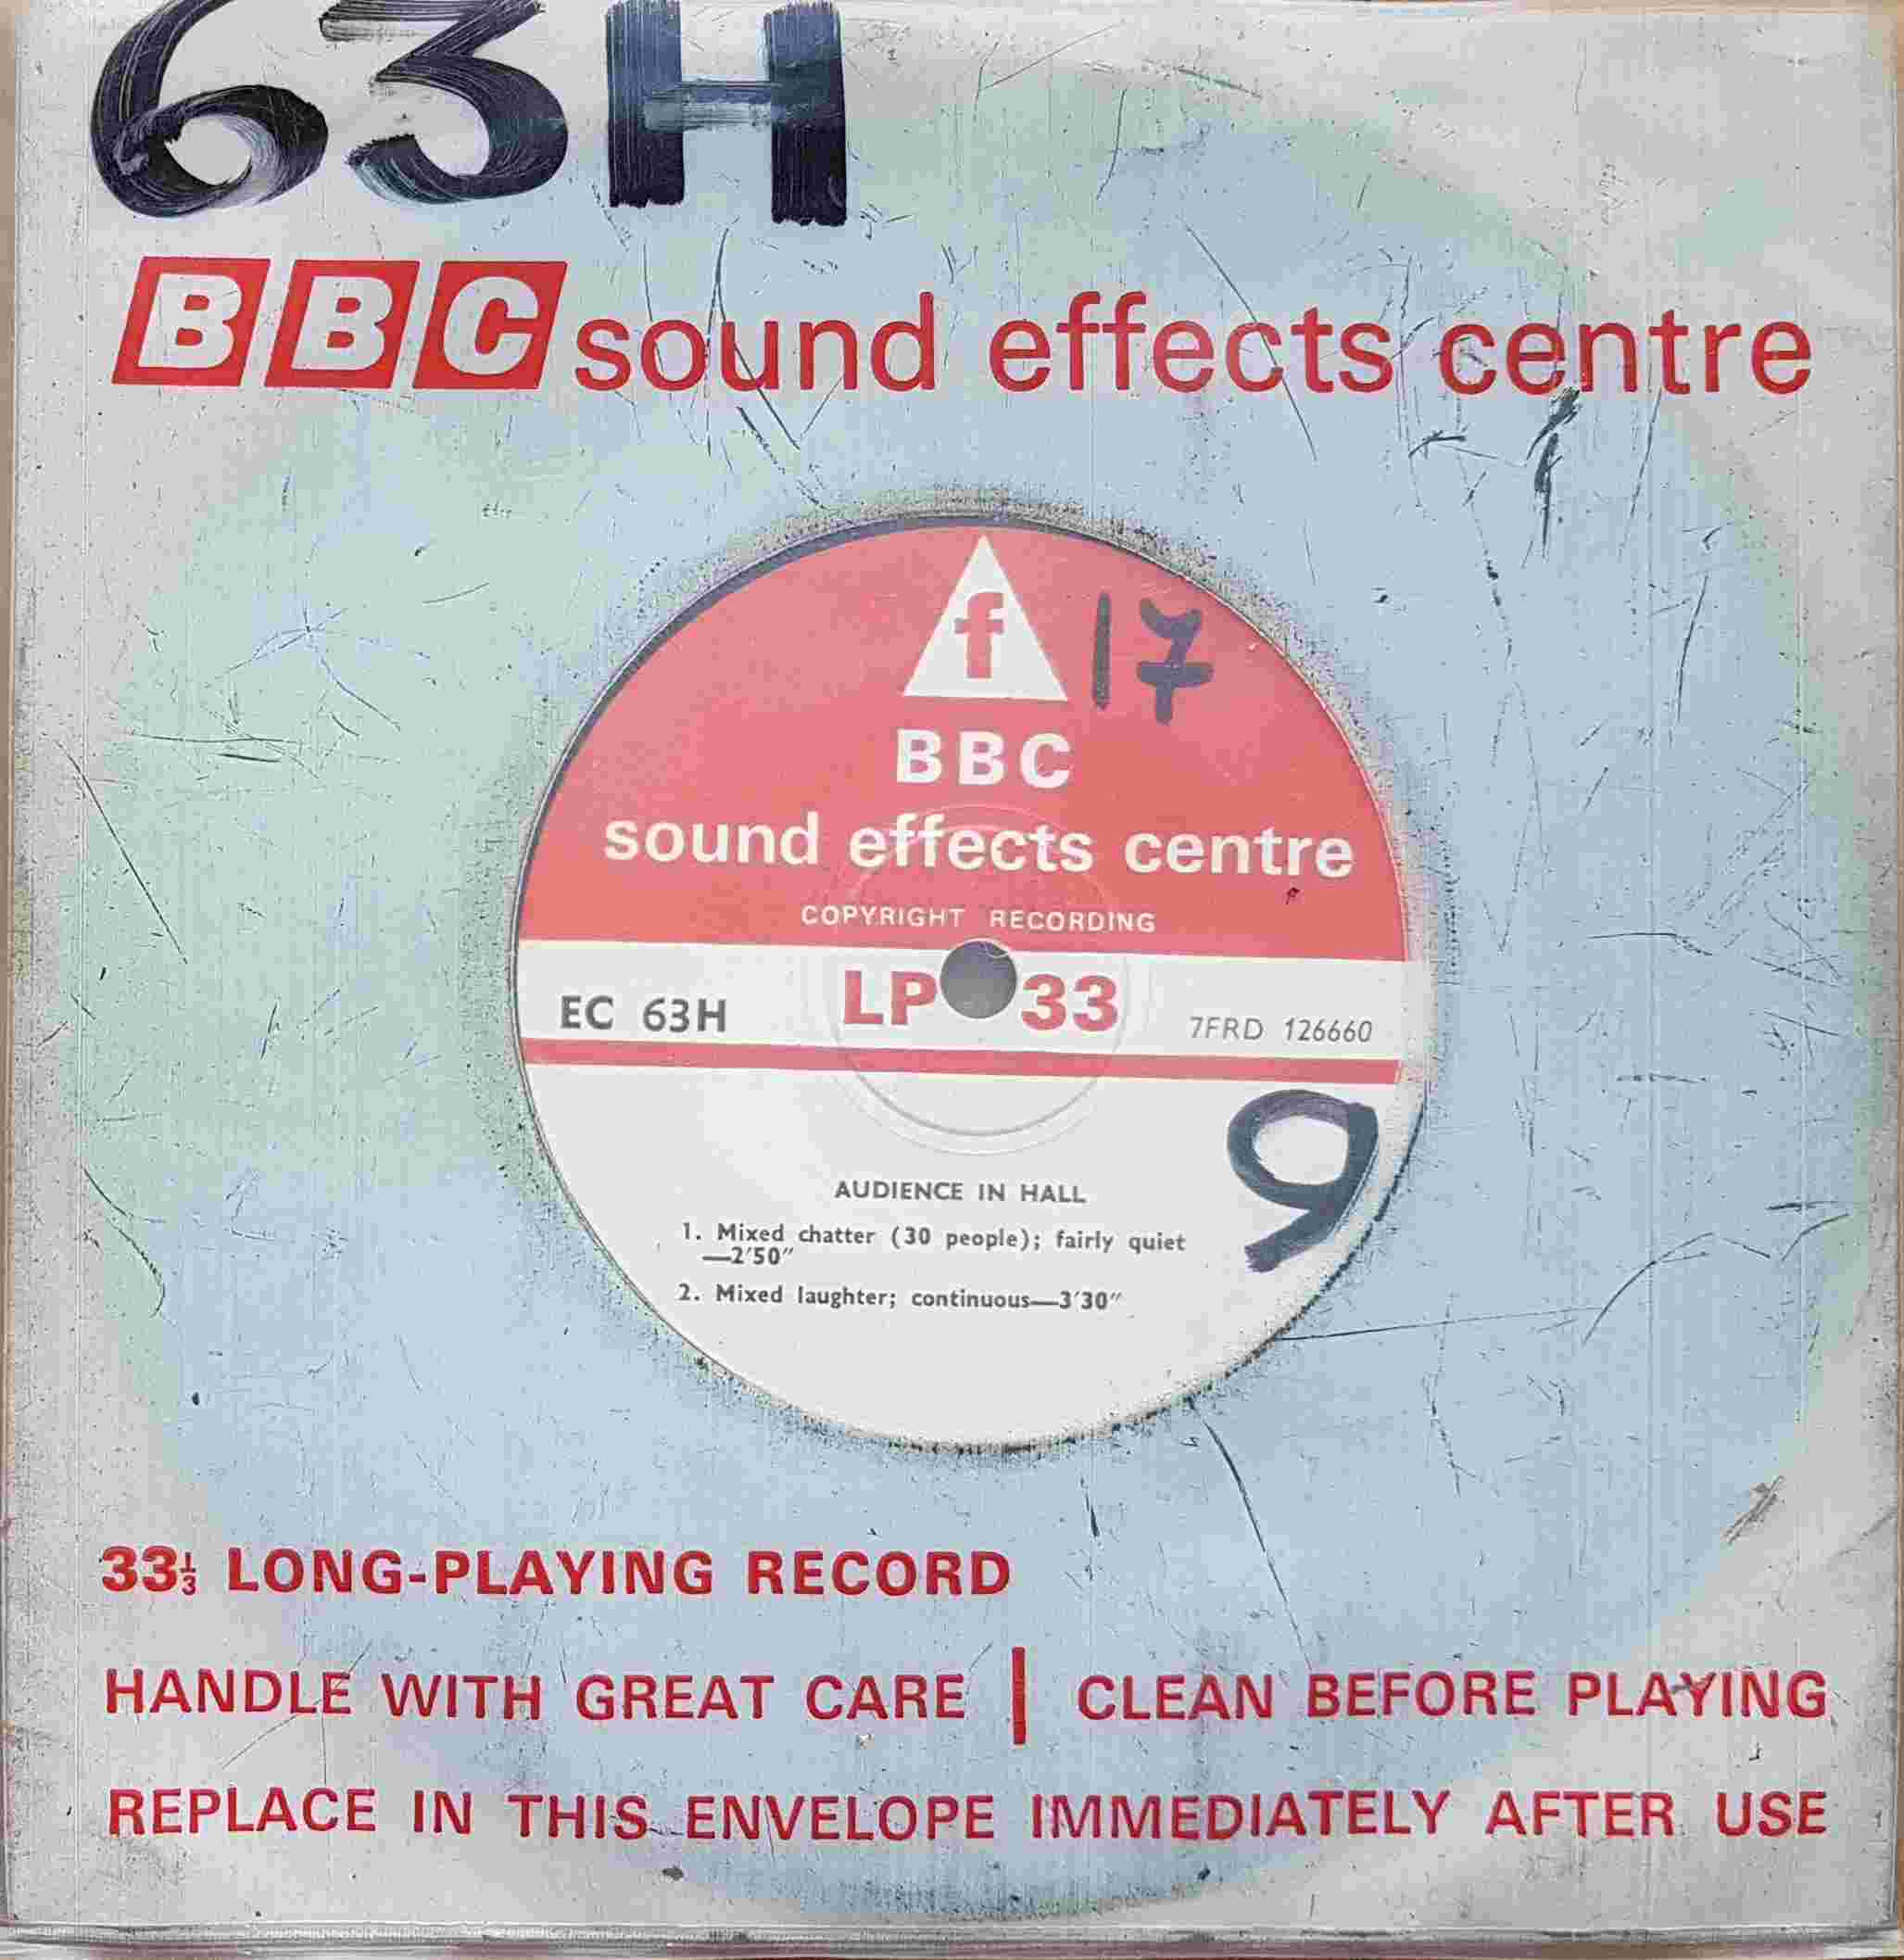 Picture of EC 63H Audience in hall by artist Not registered from the BBC singles - Records and Tapes library